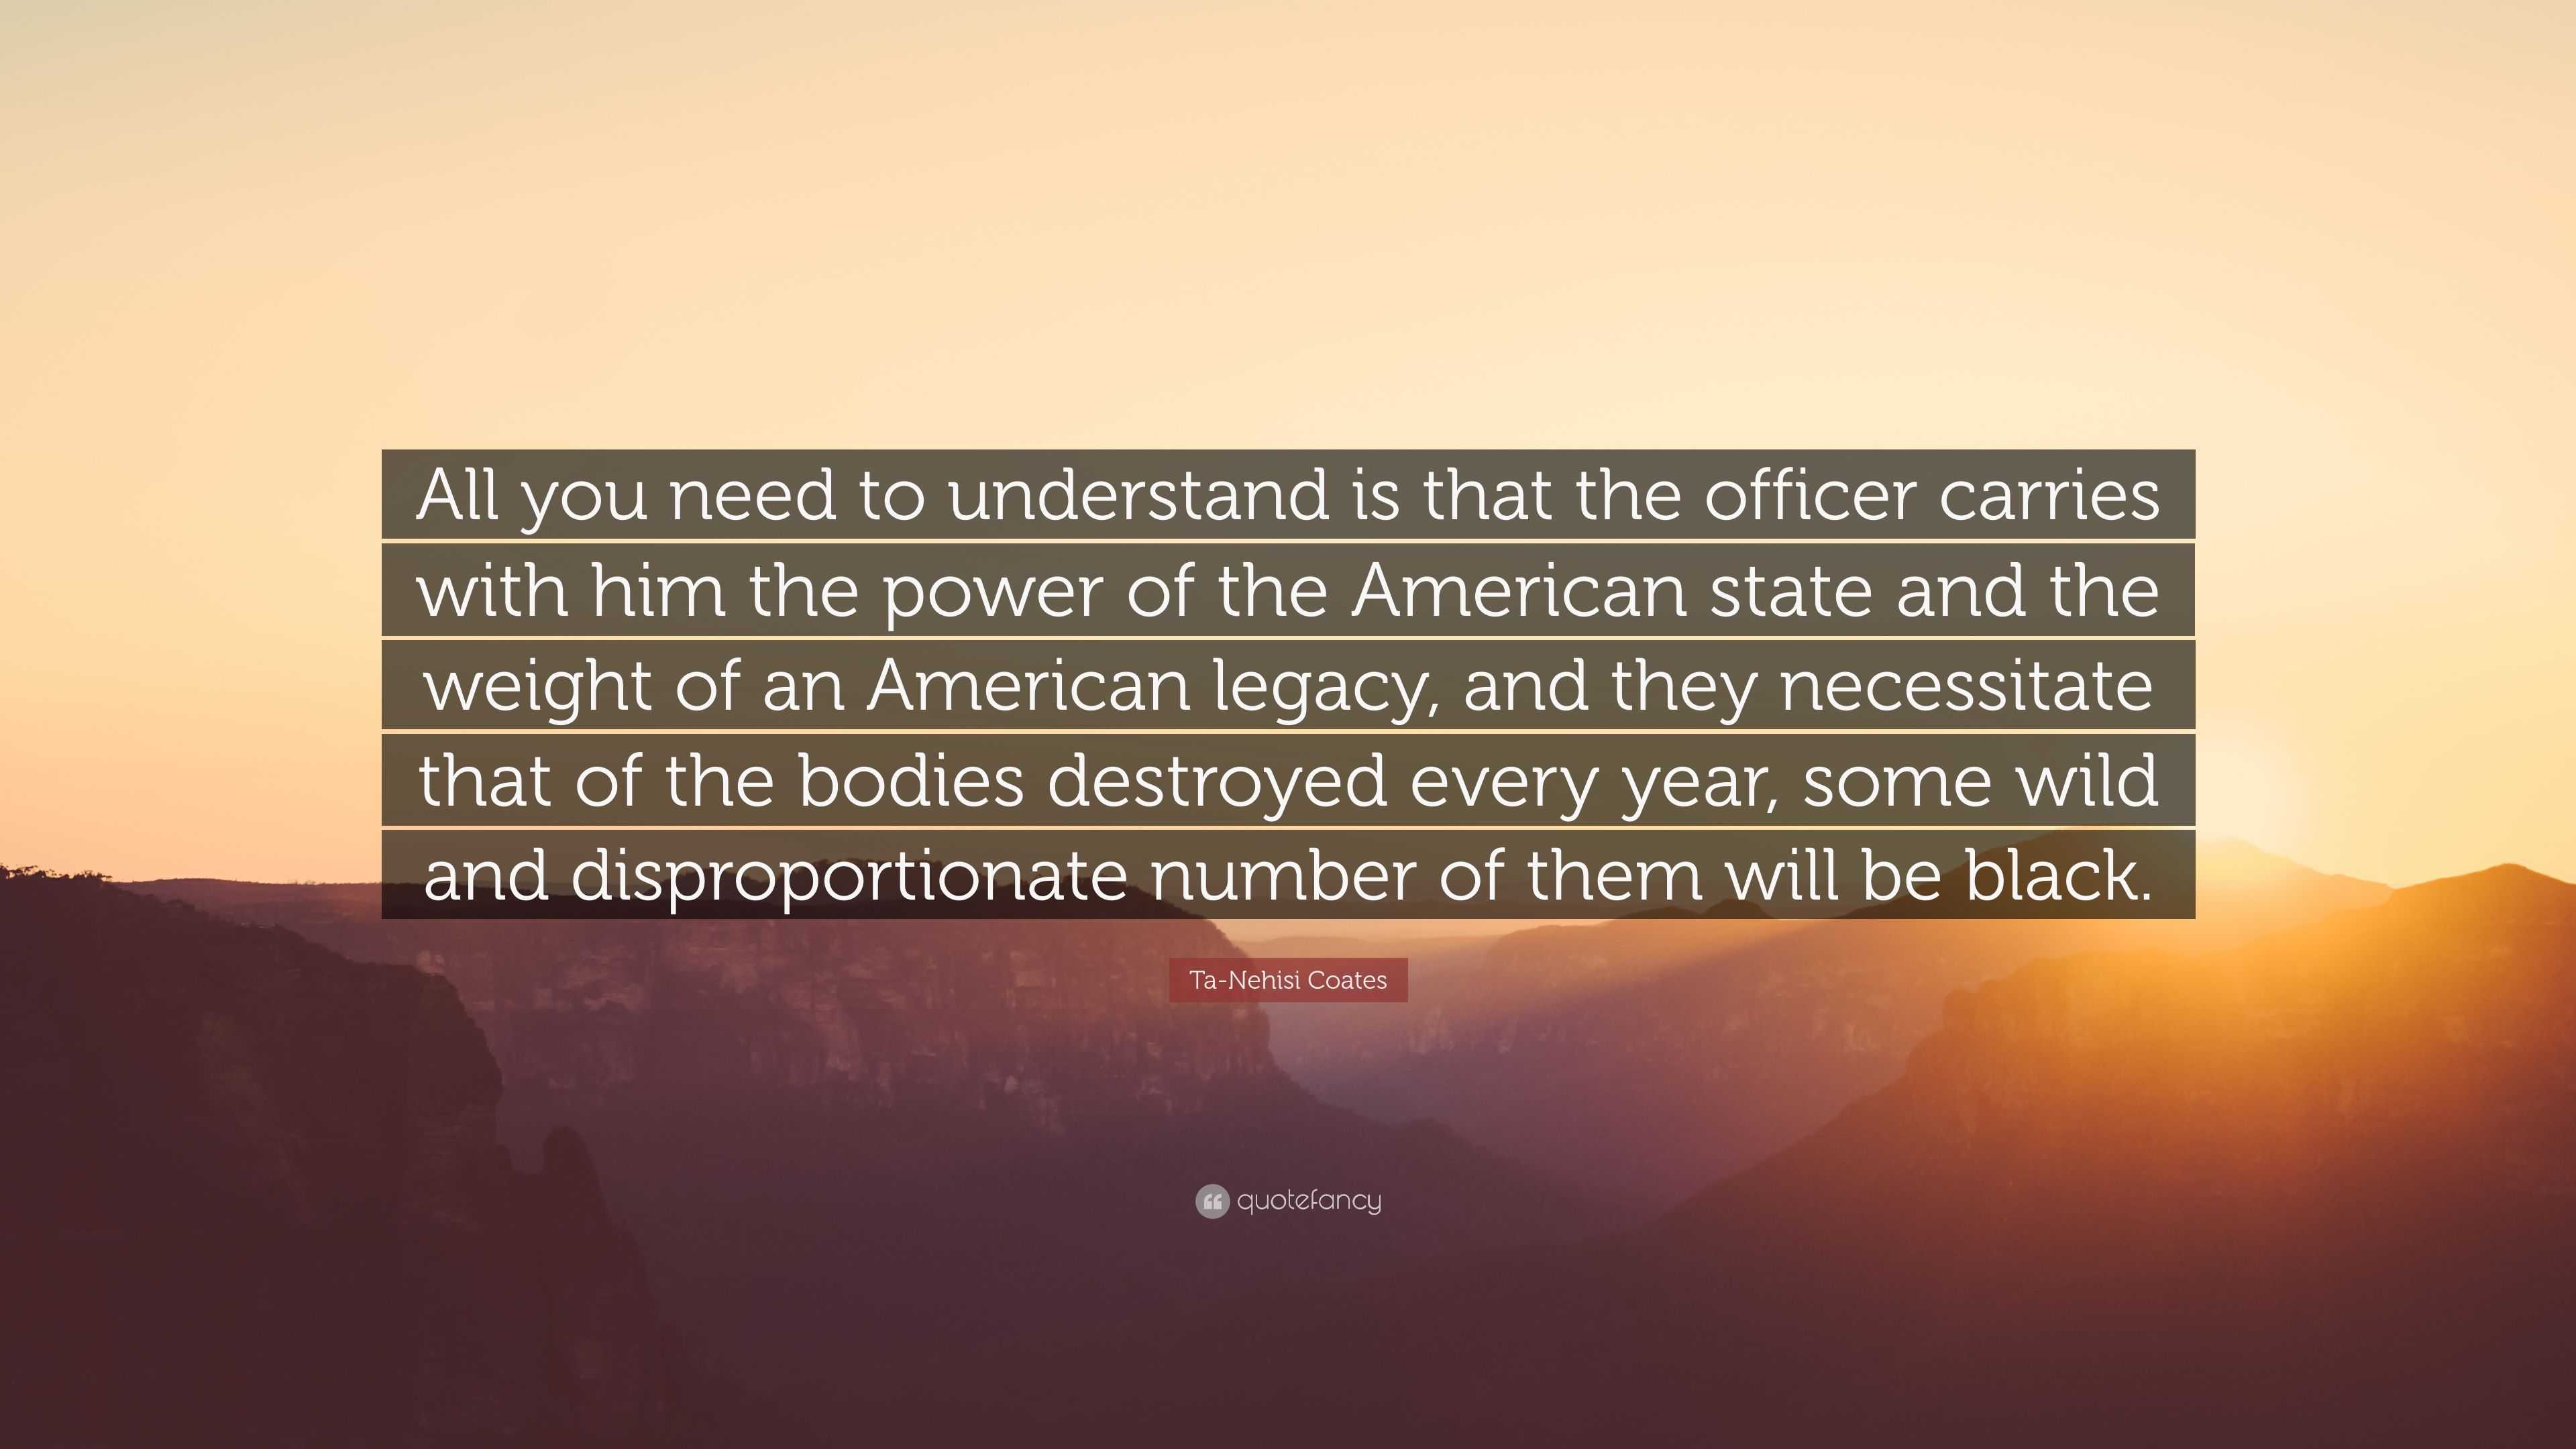 Ta-Nehisi Coates Quote: “All you need to understand is that the officer